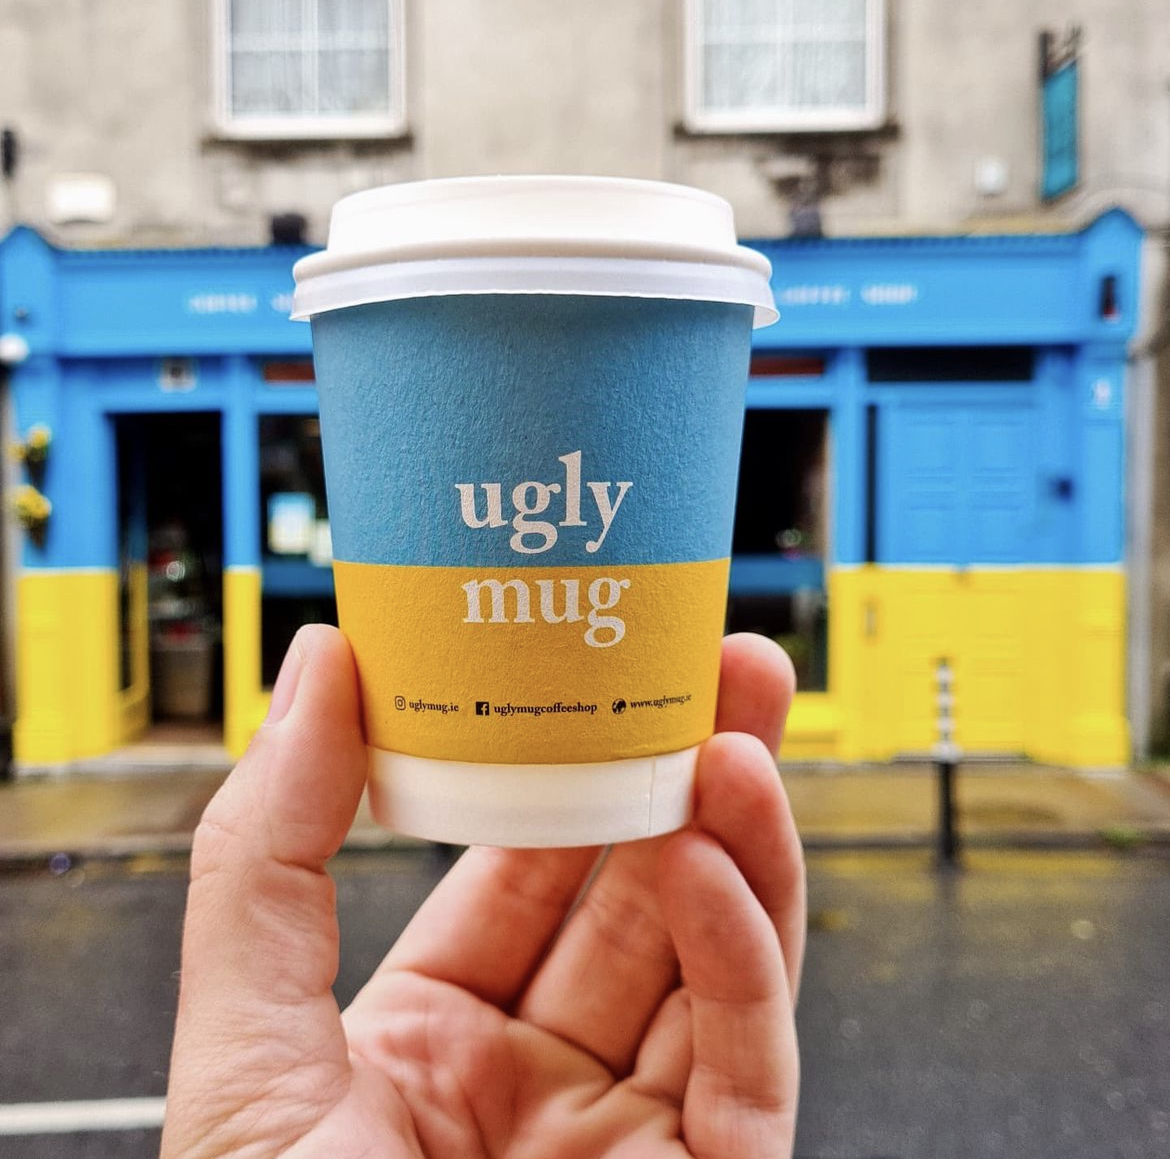 Did someone say coffee?
Whether you’re on the go or looking for a quick pit stop during lunch break… why not call into The Ugly Mug and allow yourself to recharge.
#visittralee #tralee #discoverkerry #kerry #traleetoday  #traleebay #wildatlanticway #coffeeshop #cafe  #uglymug